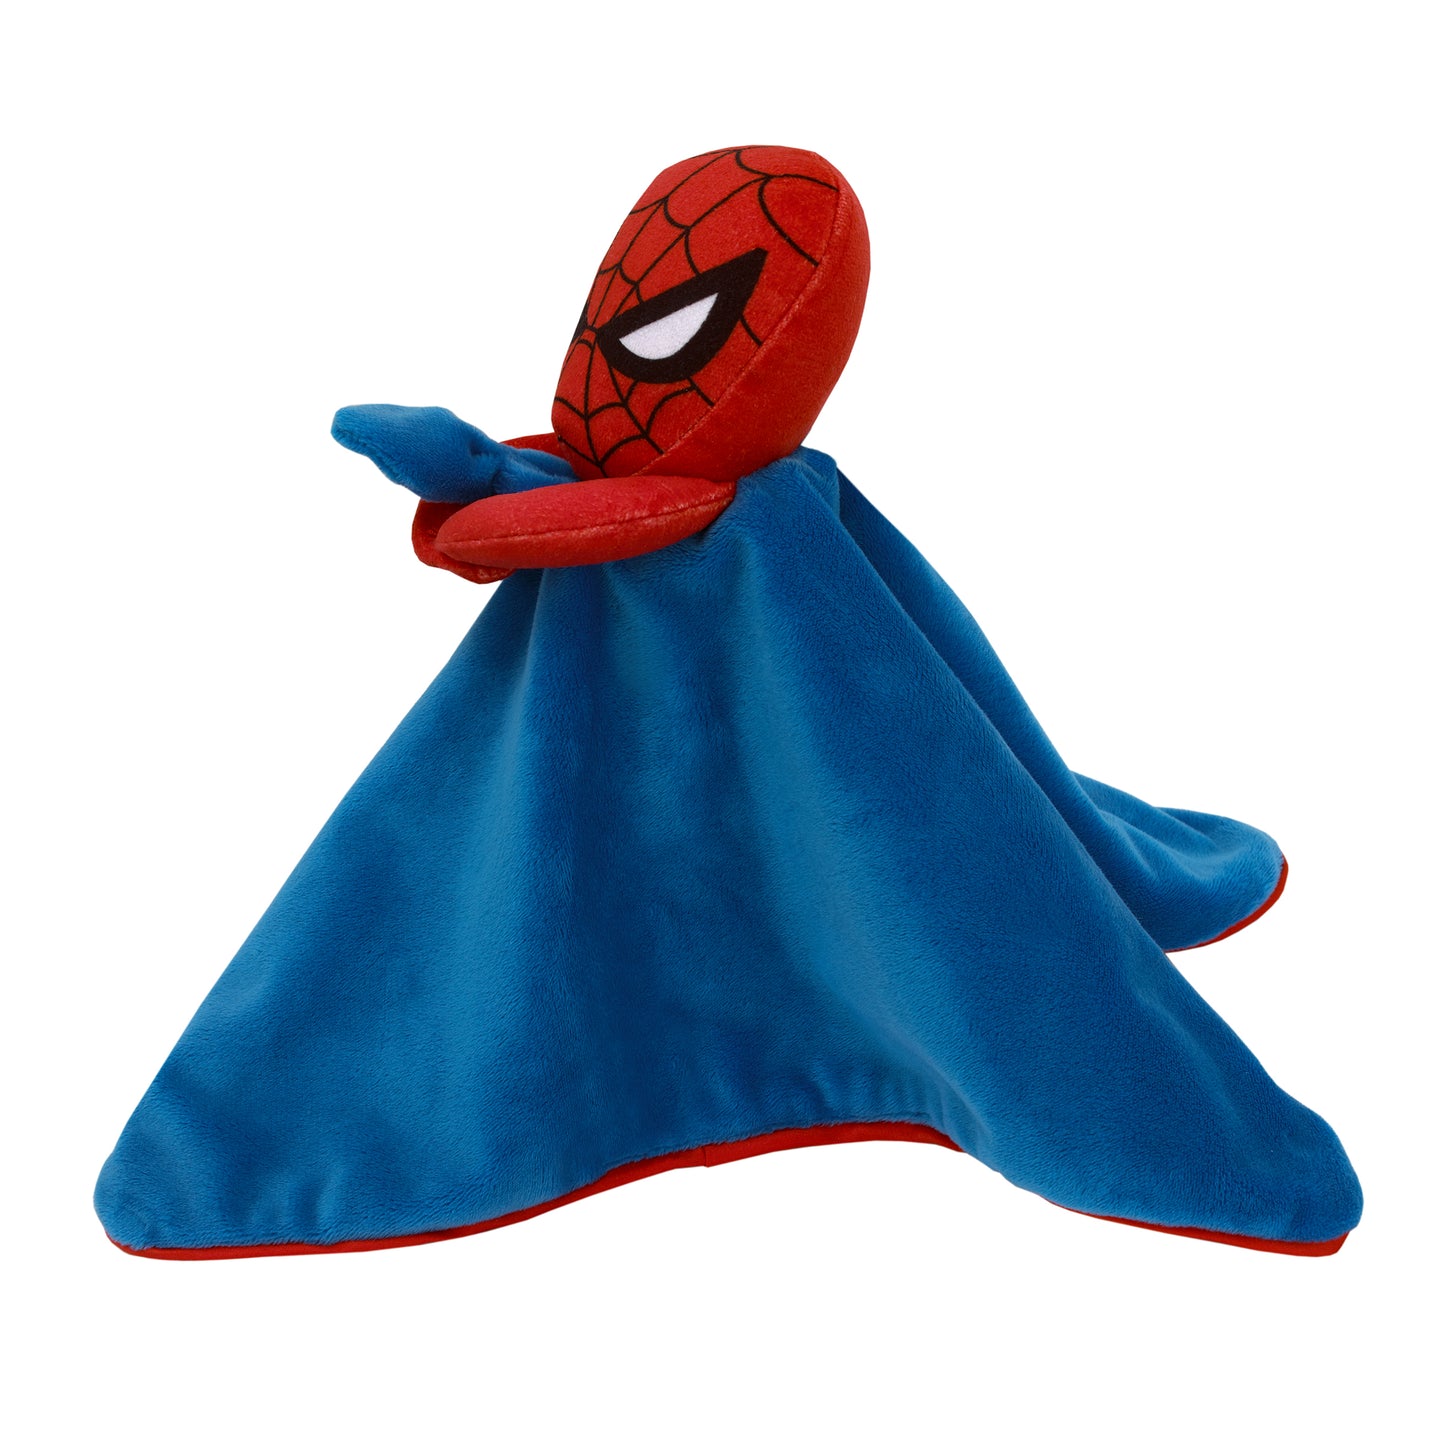 Marvel Spiderman Blue and Red Super Soft Security Baby Blanket